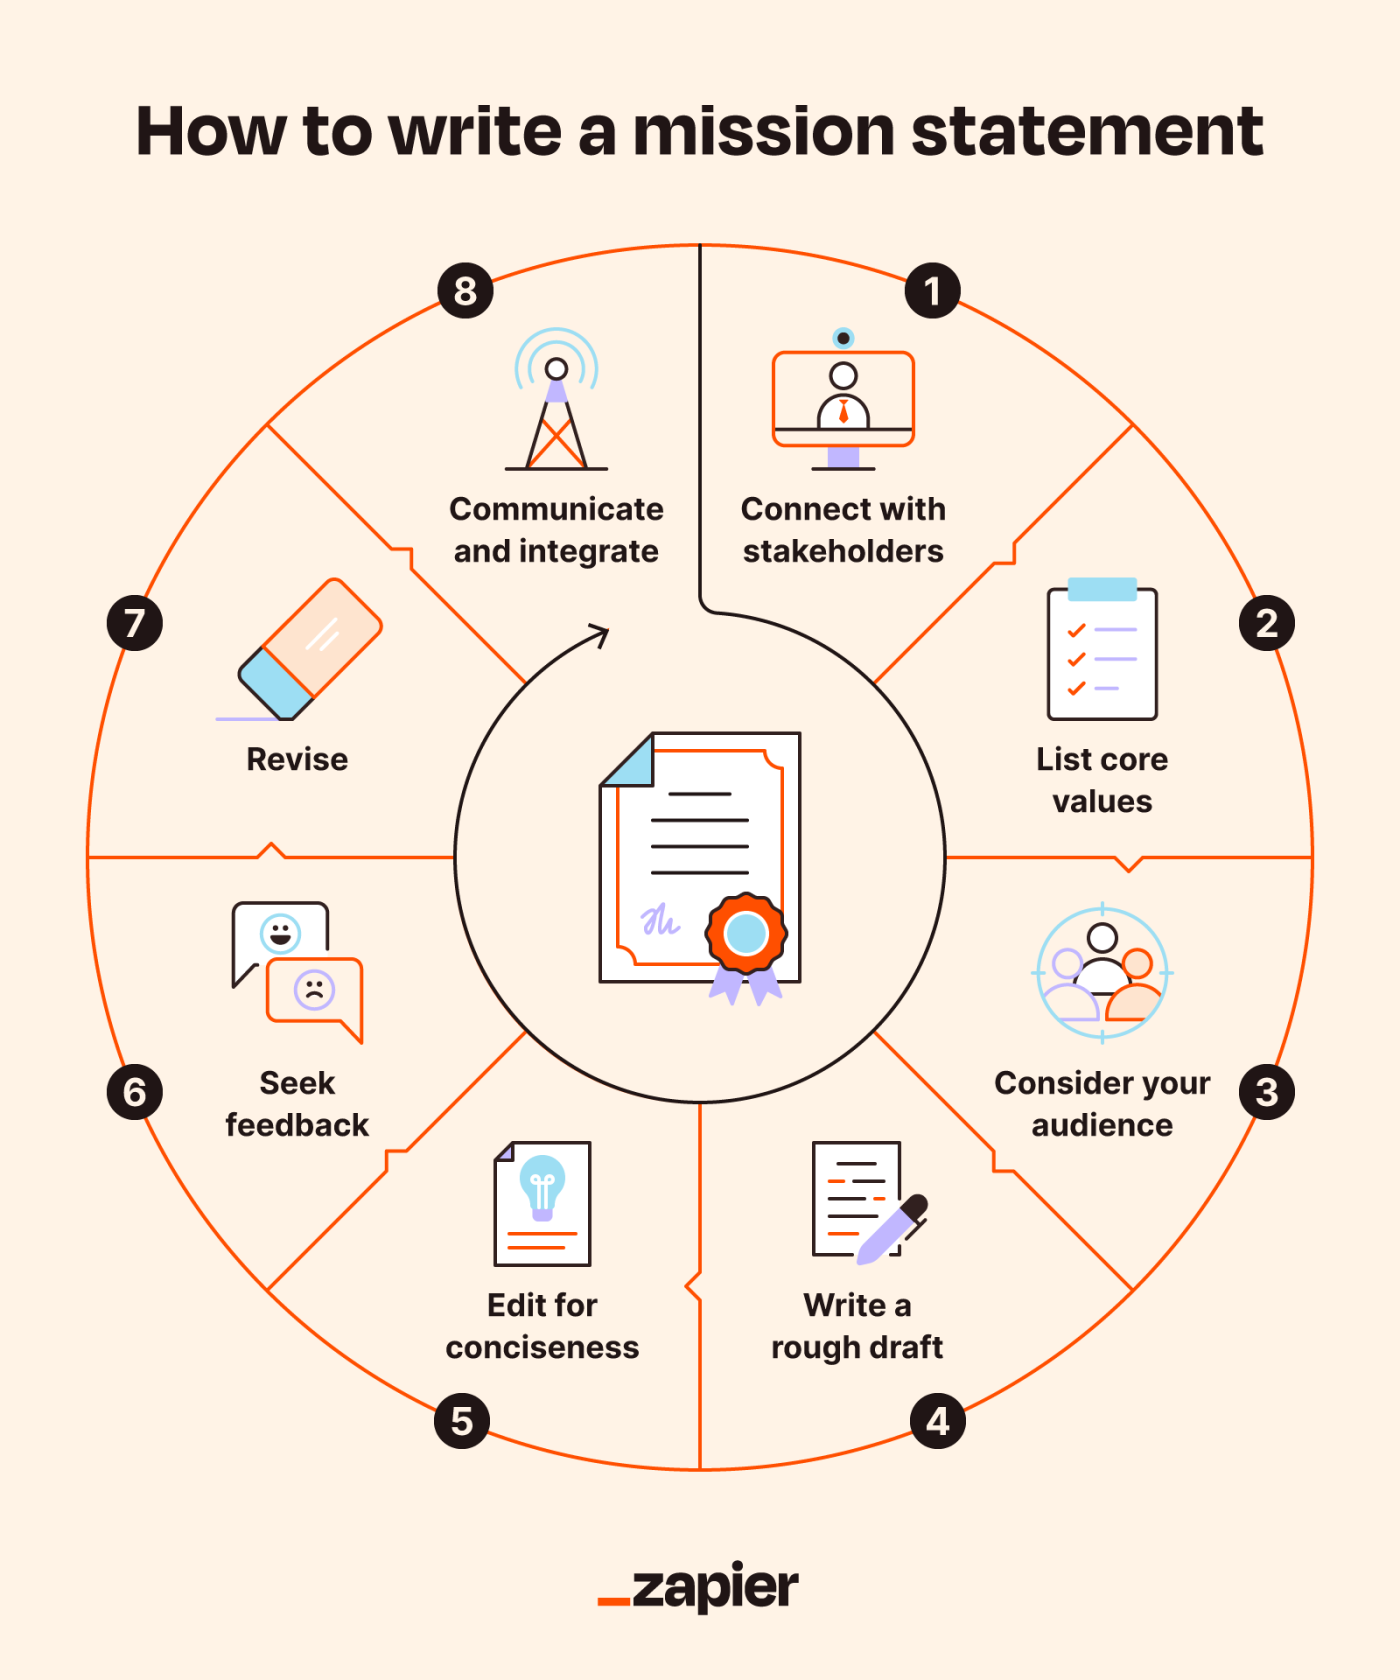 Eight steps to write a mission statement in a circular pattern with icons for each: connect with stakeholders, list core values, consider your audience, write a rough draft, edit for conciseness, seek feedback, revise, and communicate and integrate. 